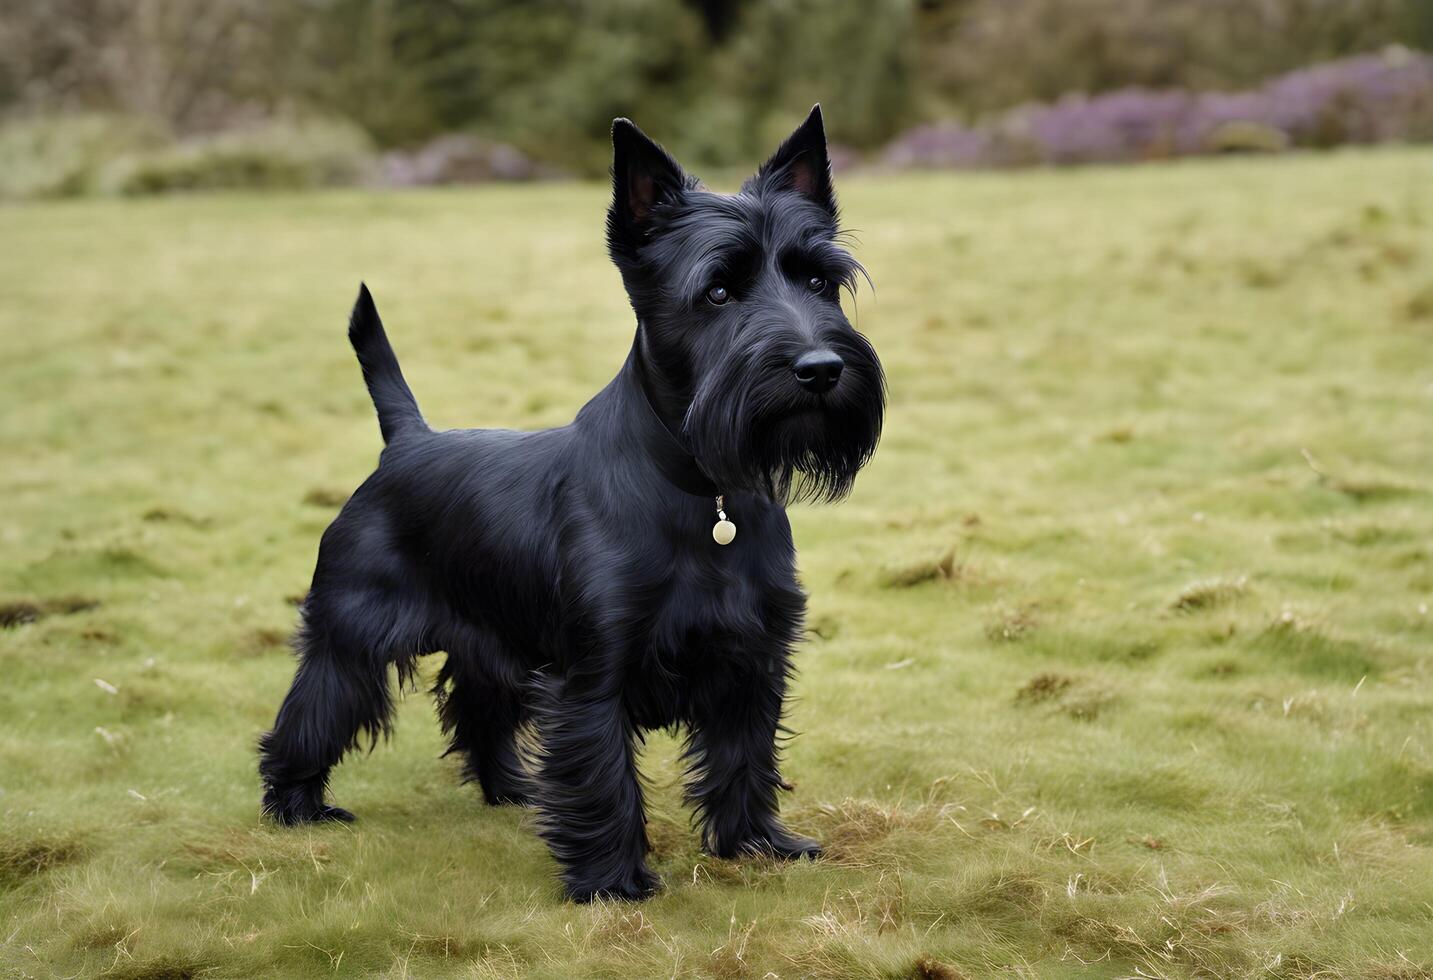 A view of a Scottish Terrier photo